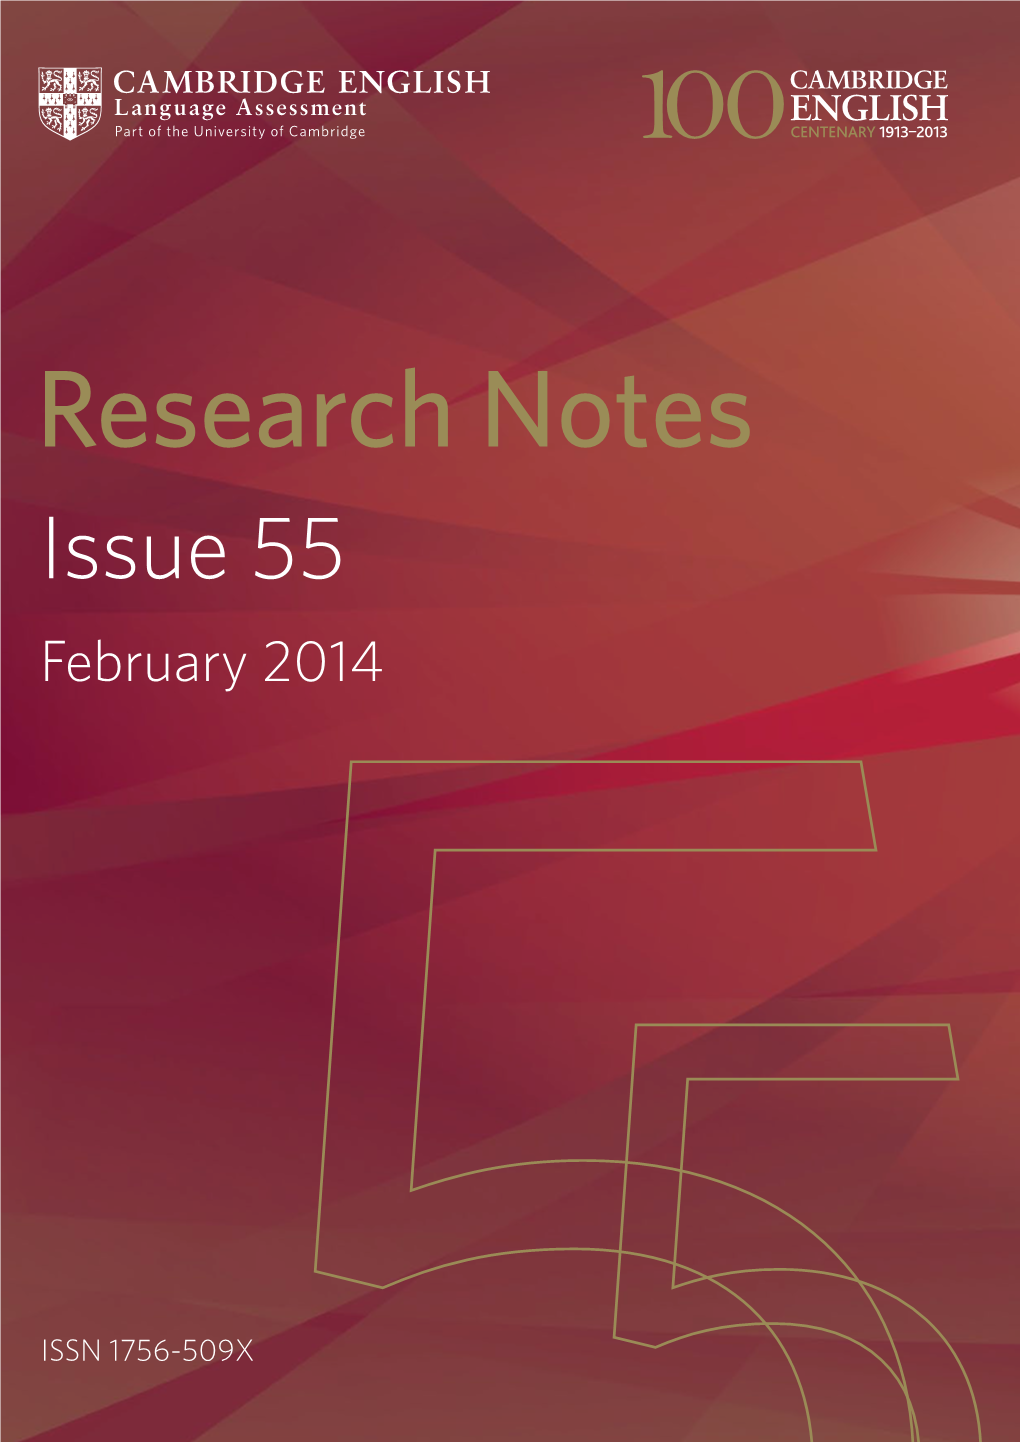 Research Notes 55